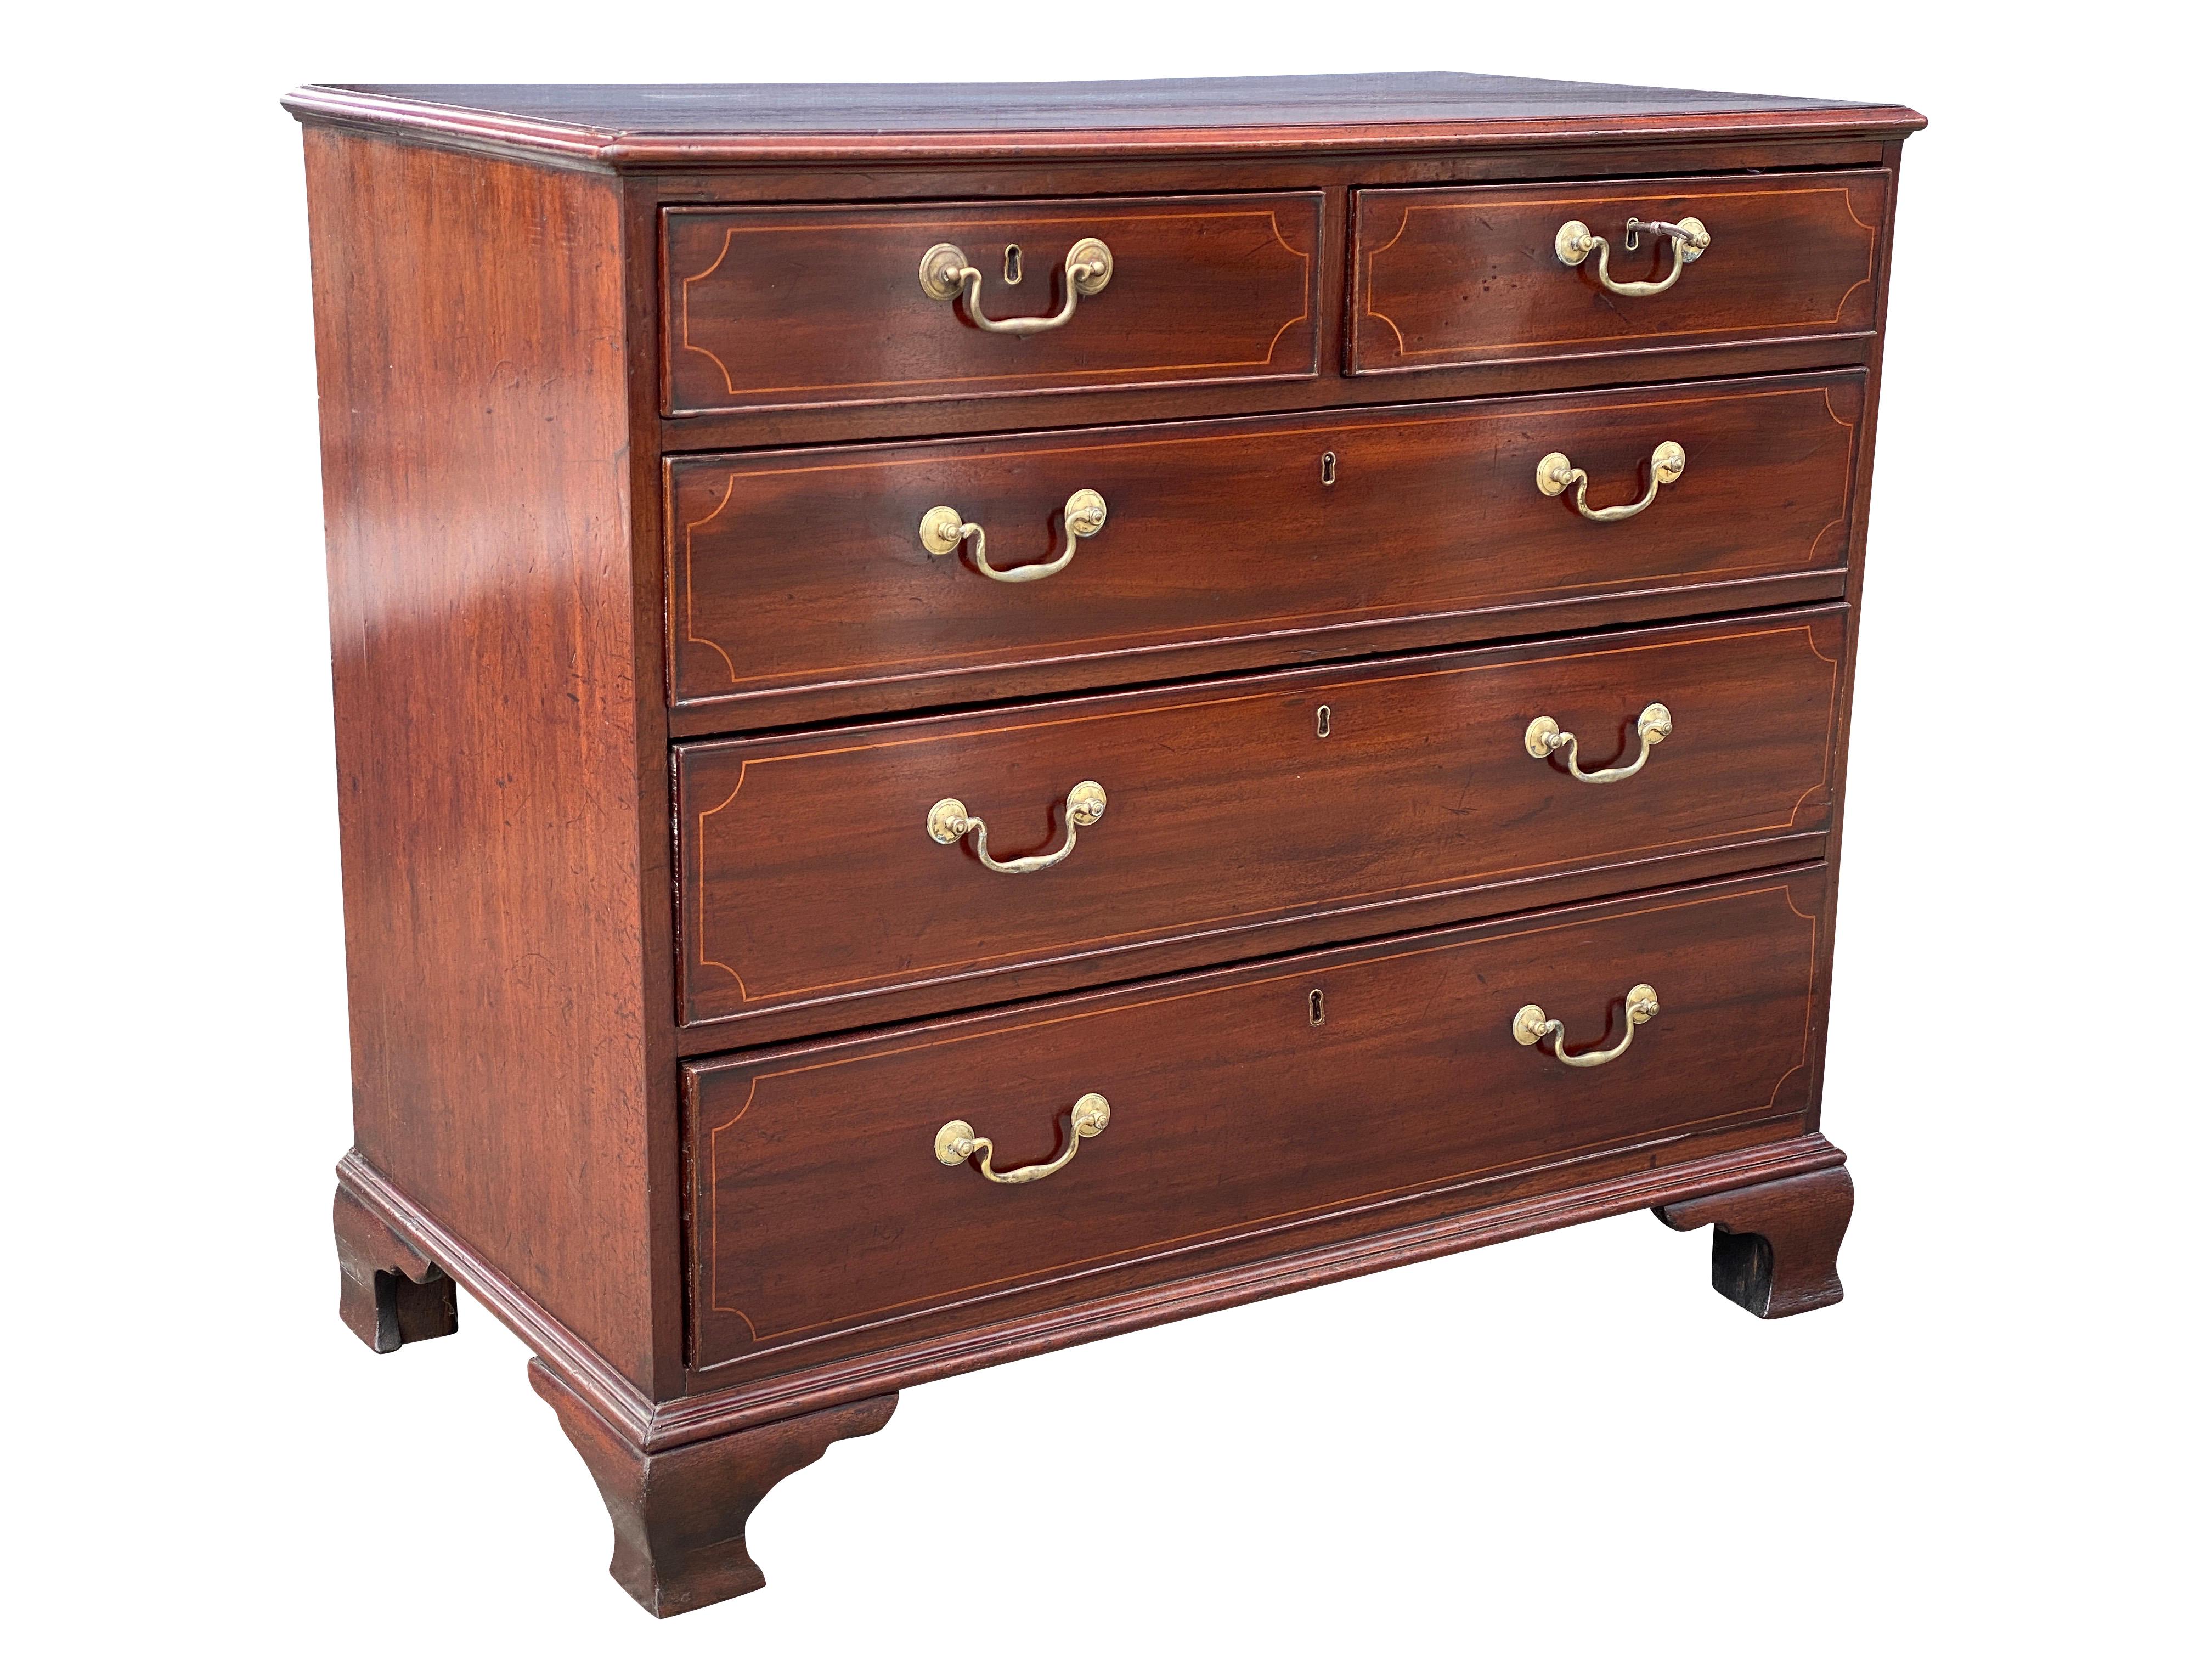 With a rectangular molded top over a pair of drawers over three long drawers all with brass bail handles and string inlay, raised on ogee bracket feet. Photographed outdoors so it appears redder in color than actual.